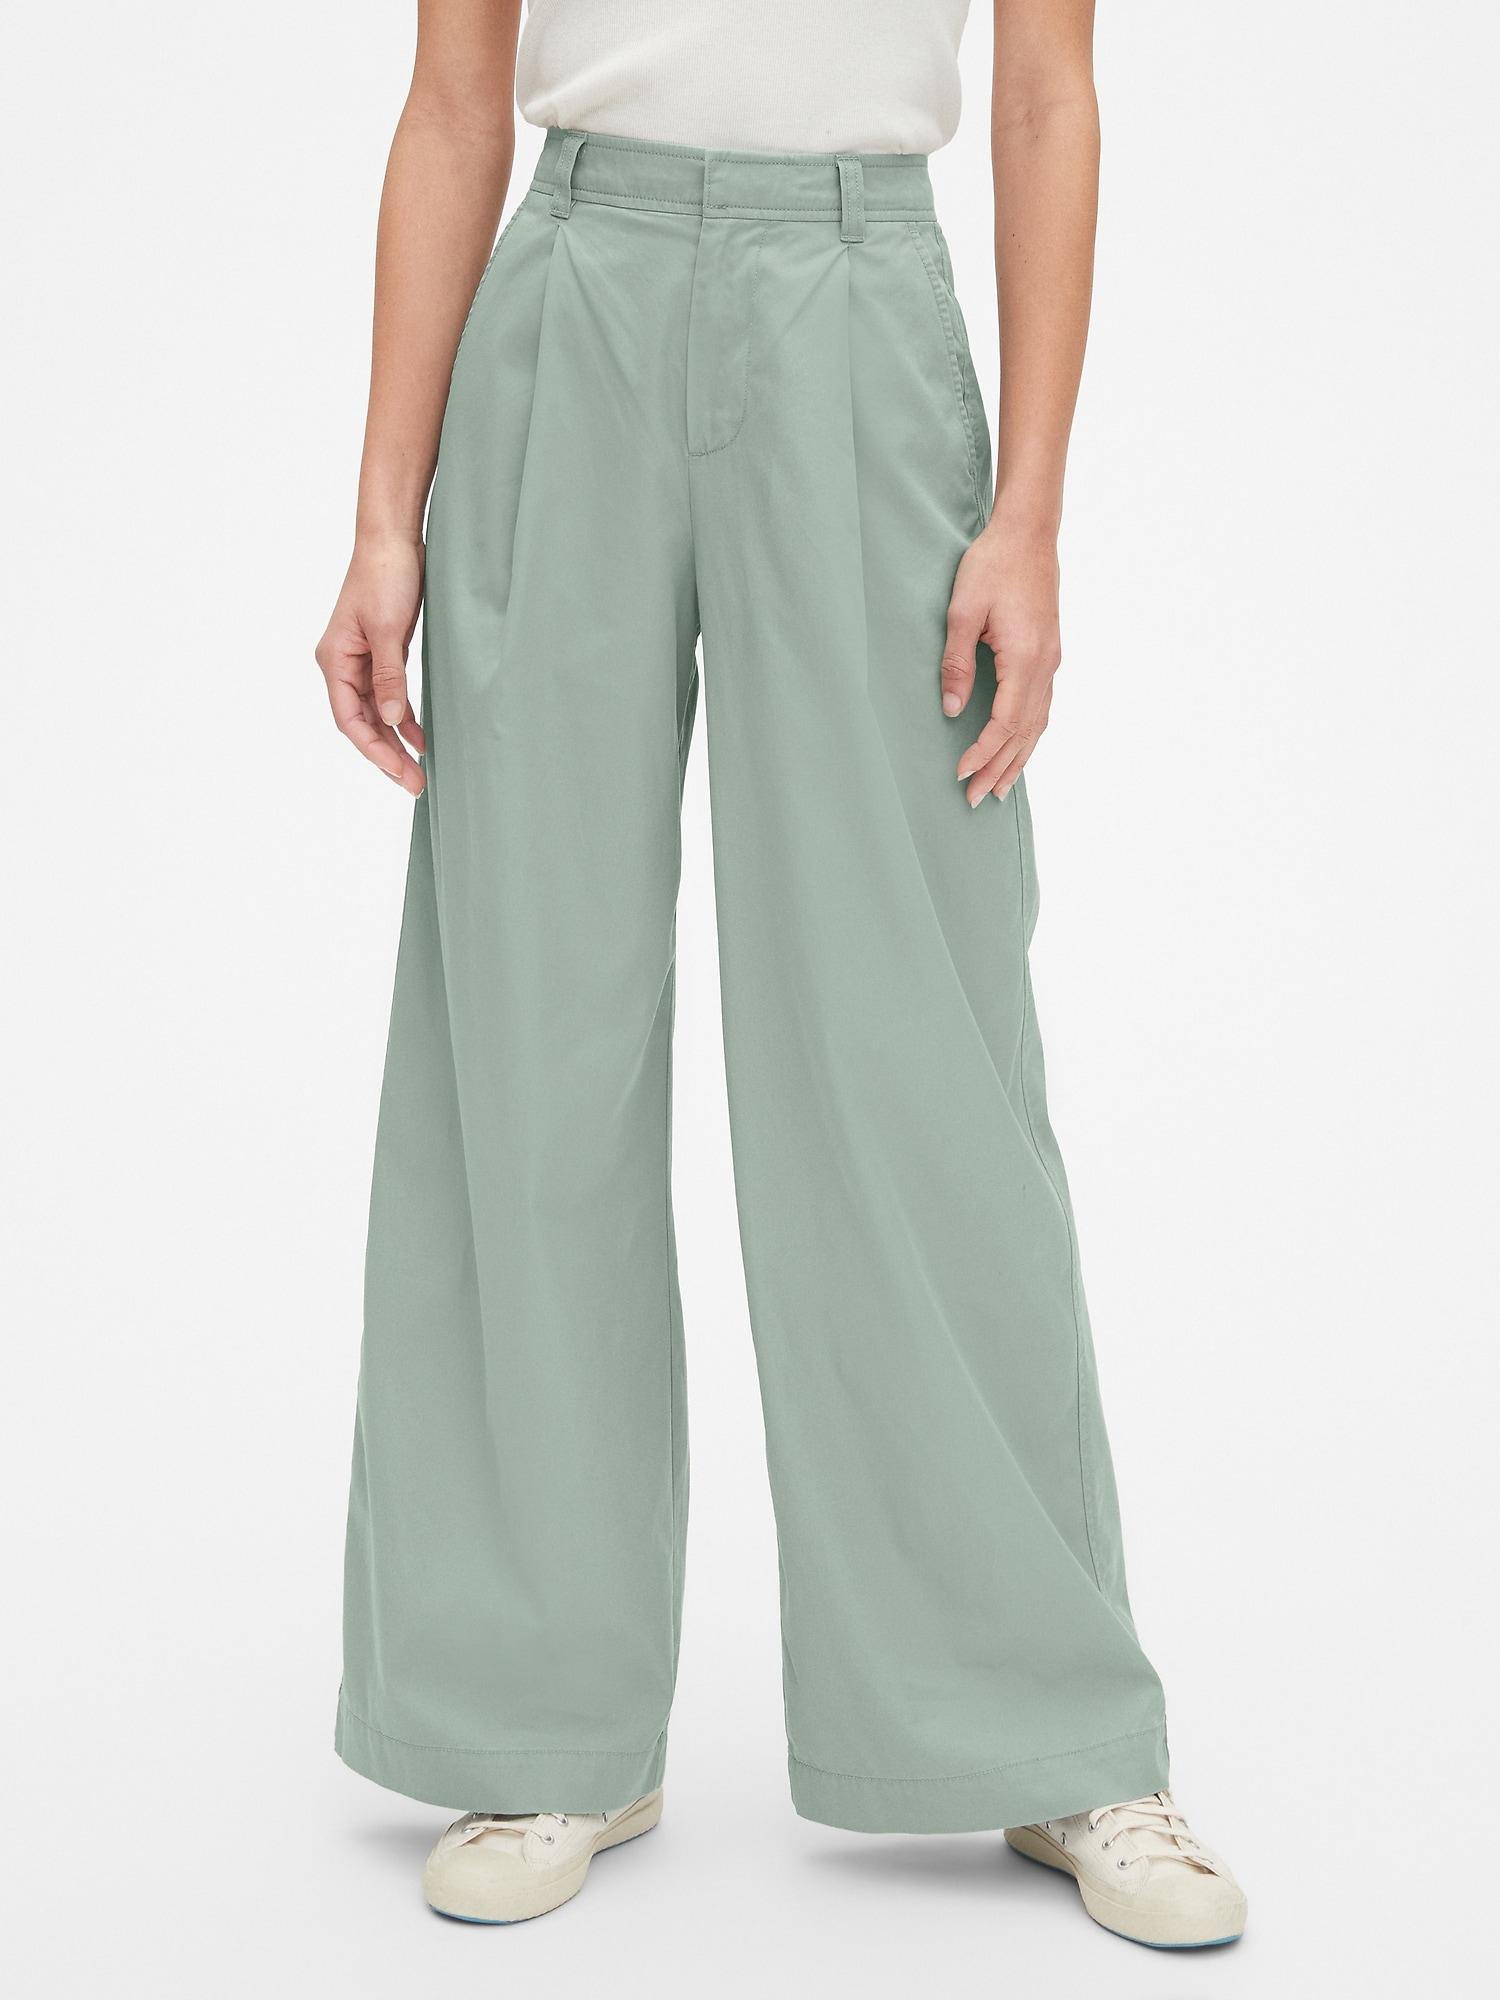 Gap High Rise Pleated Wide Leg Chino Pants in Sage Green (Green) - Lyst